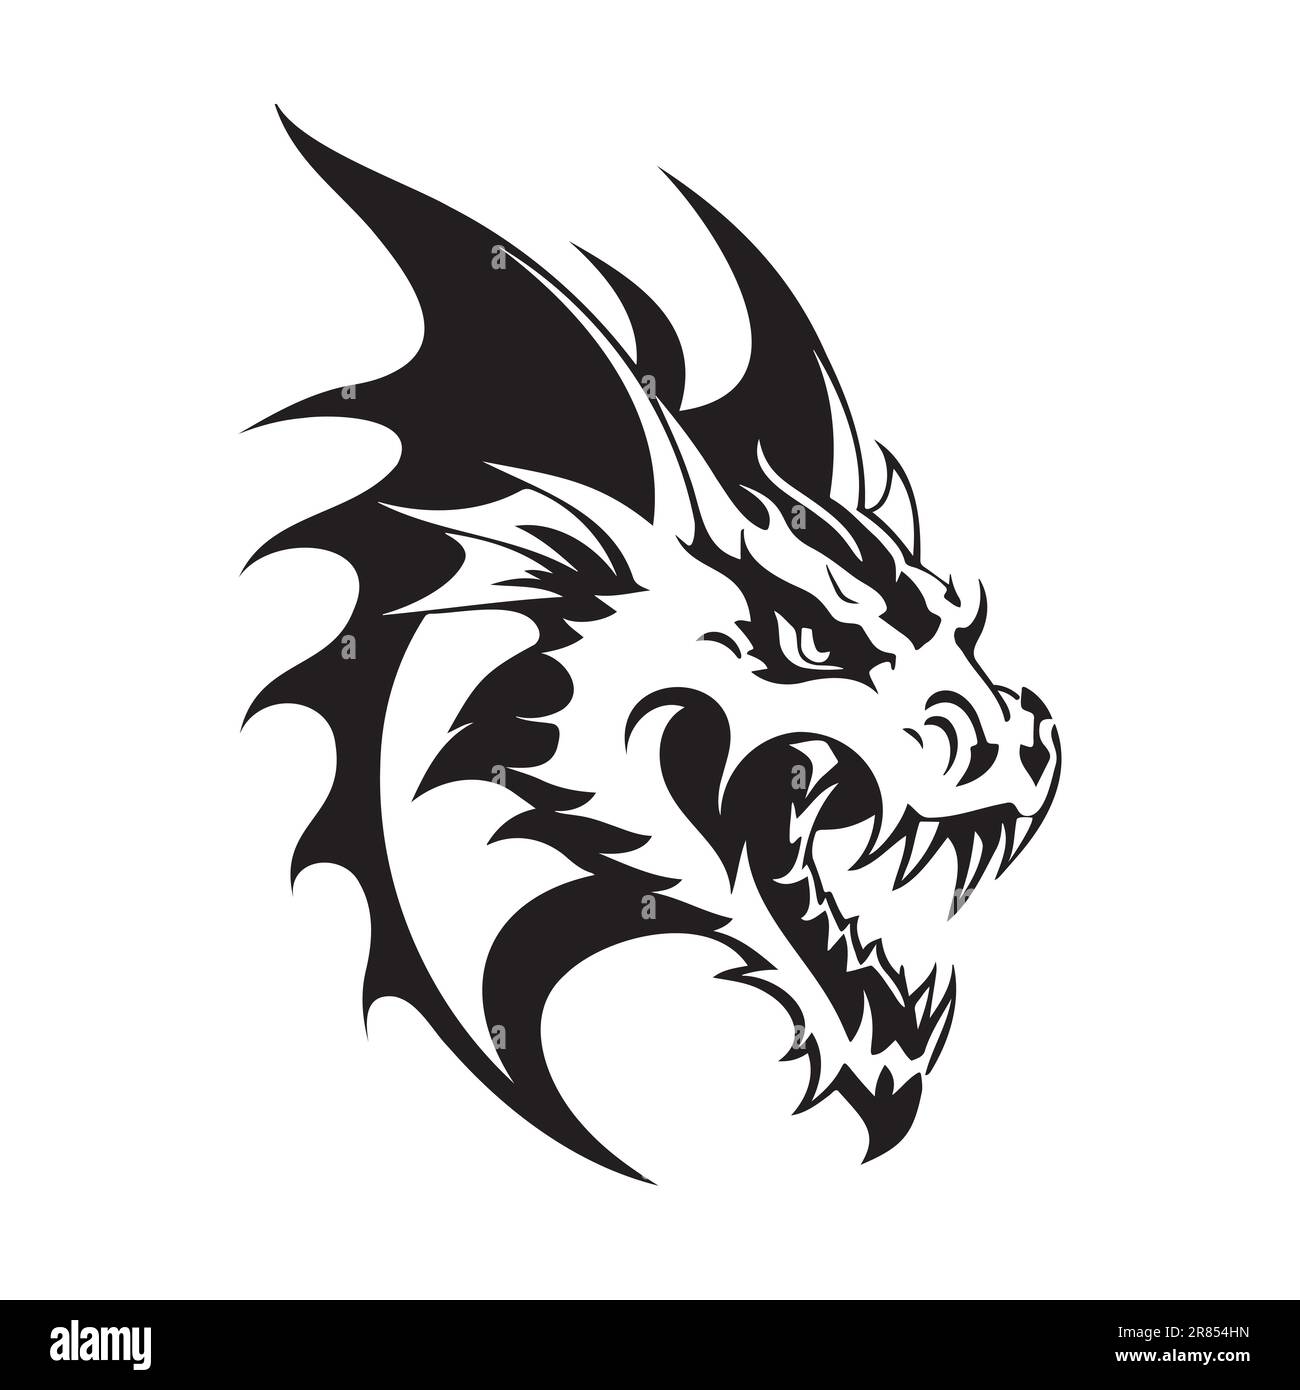 Dragon head drawing Black and White Stock Photos & Images - Alamy